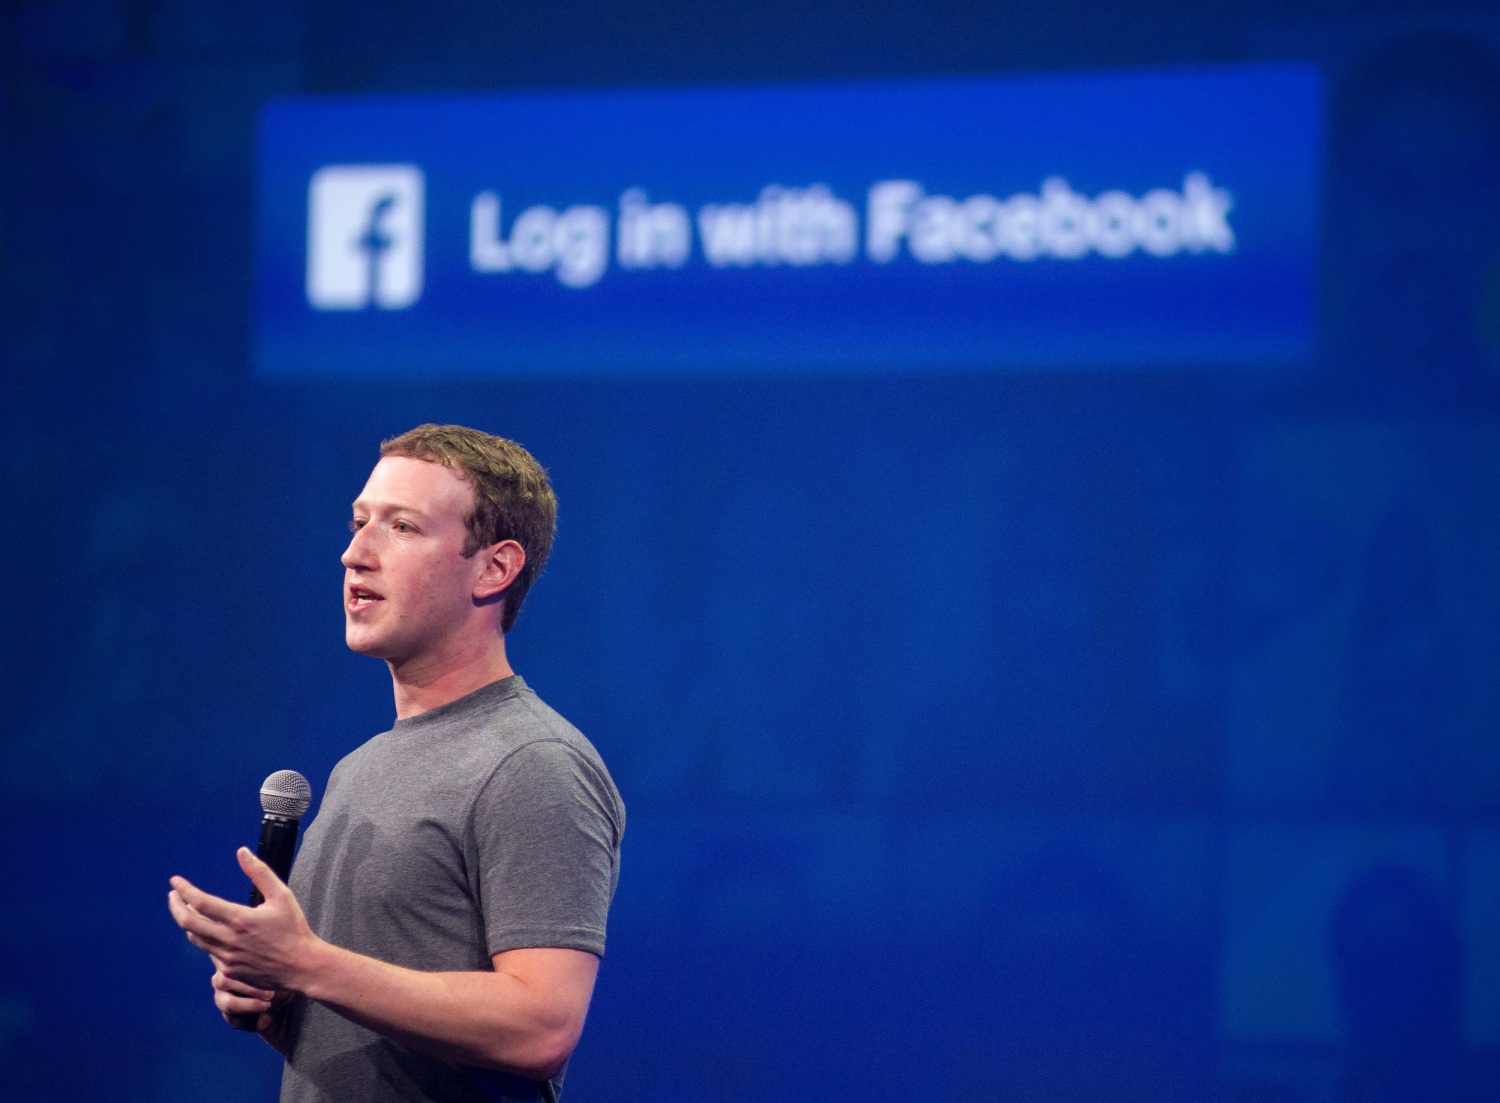 Facebook privacy hoax claims company will start charging users